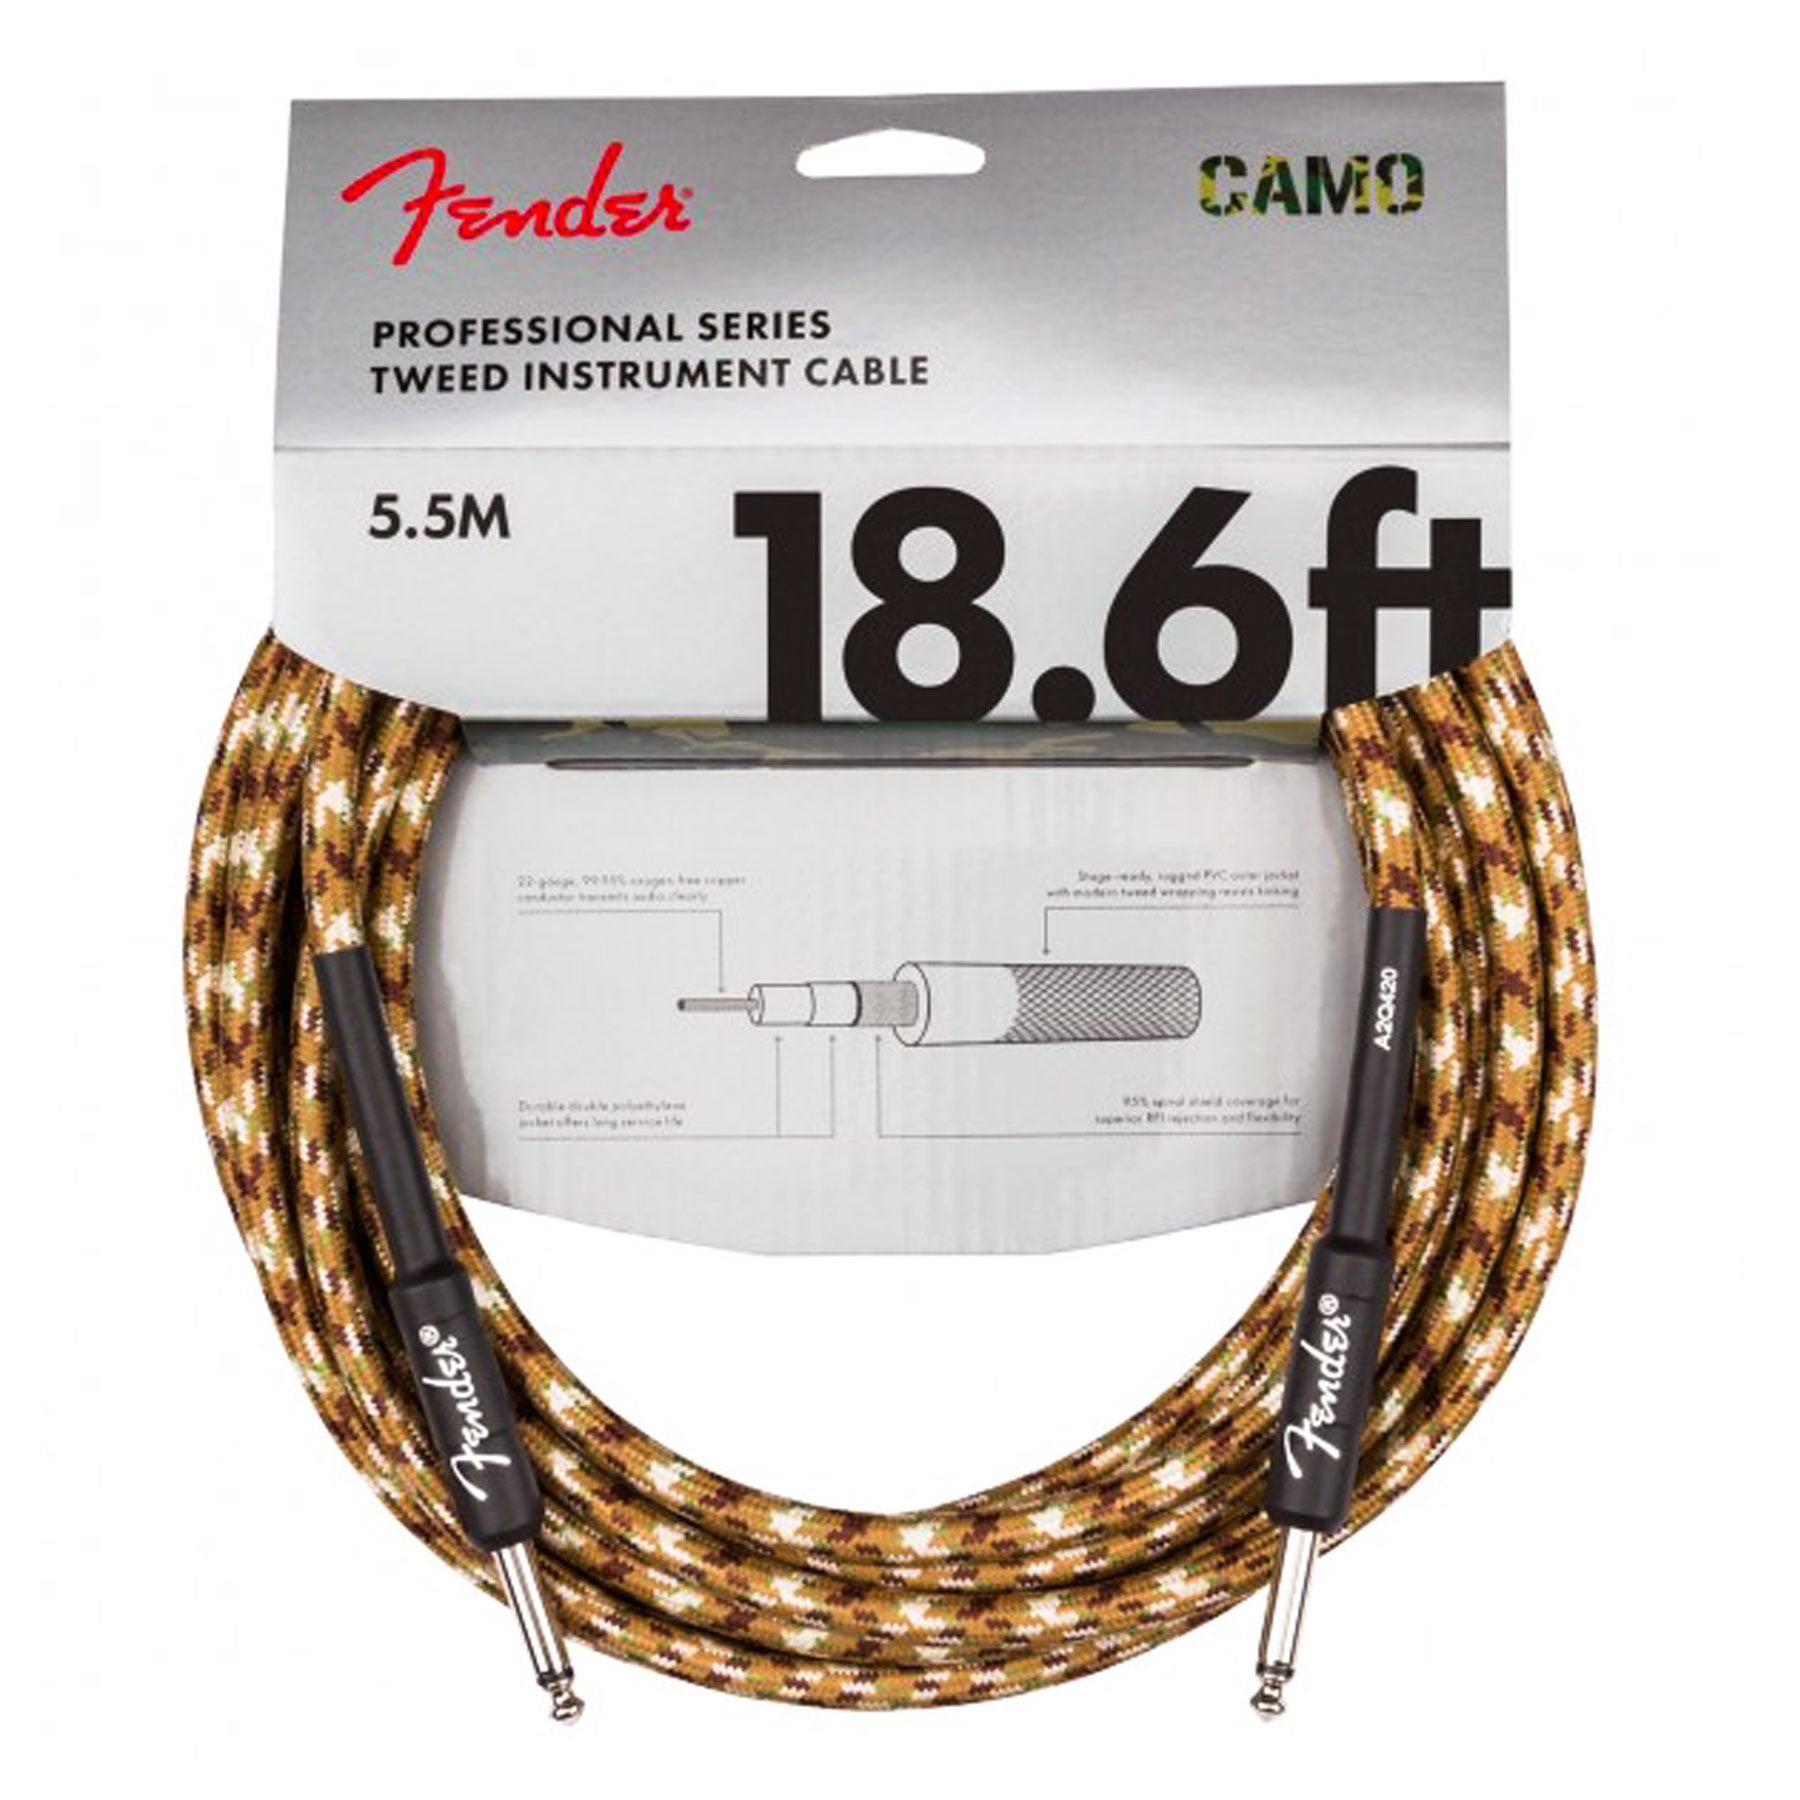 FENDER PROFESSIONAL SERIES INSTRUMENT CABLE 18.6’ DESERT CAMO STRAIGHT TO STRAIGHT